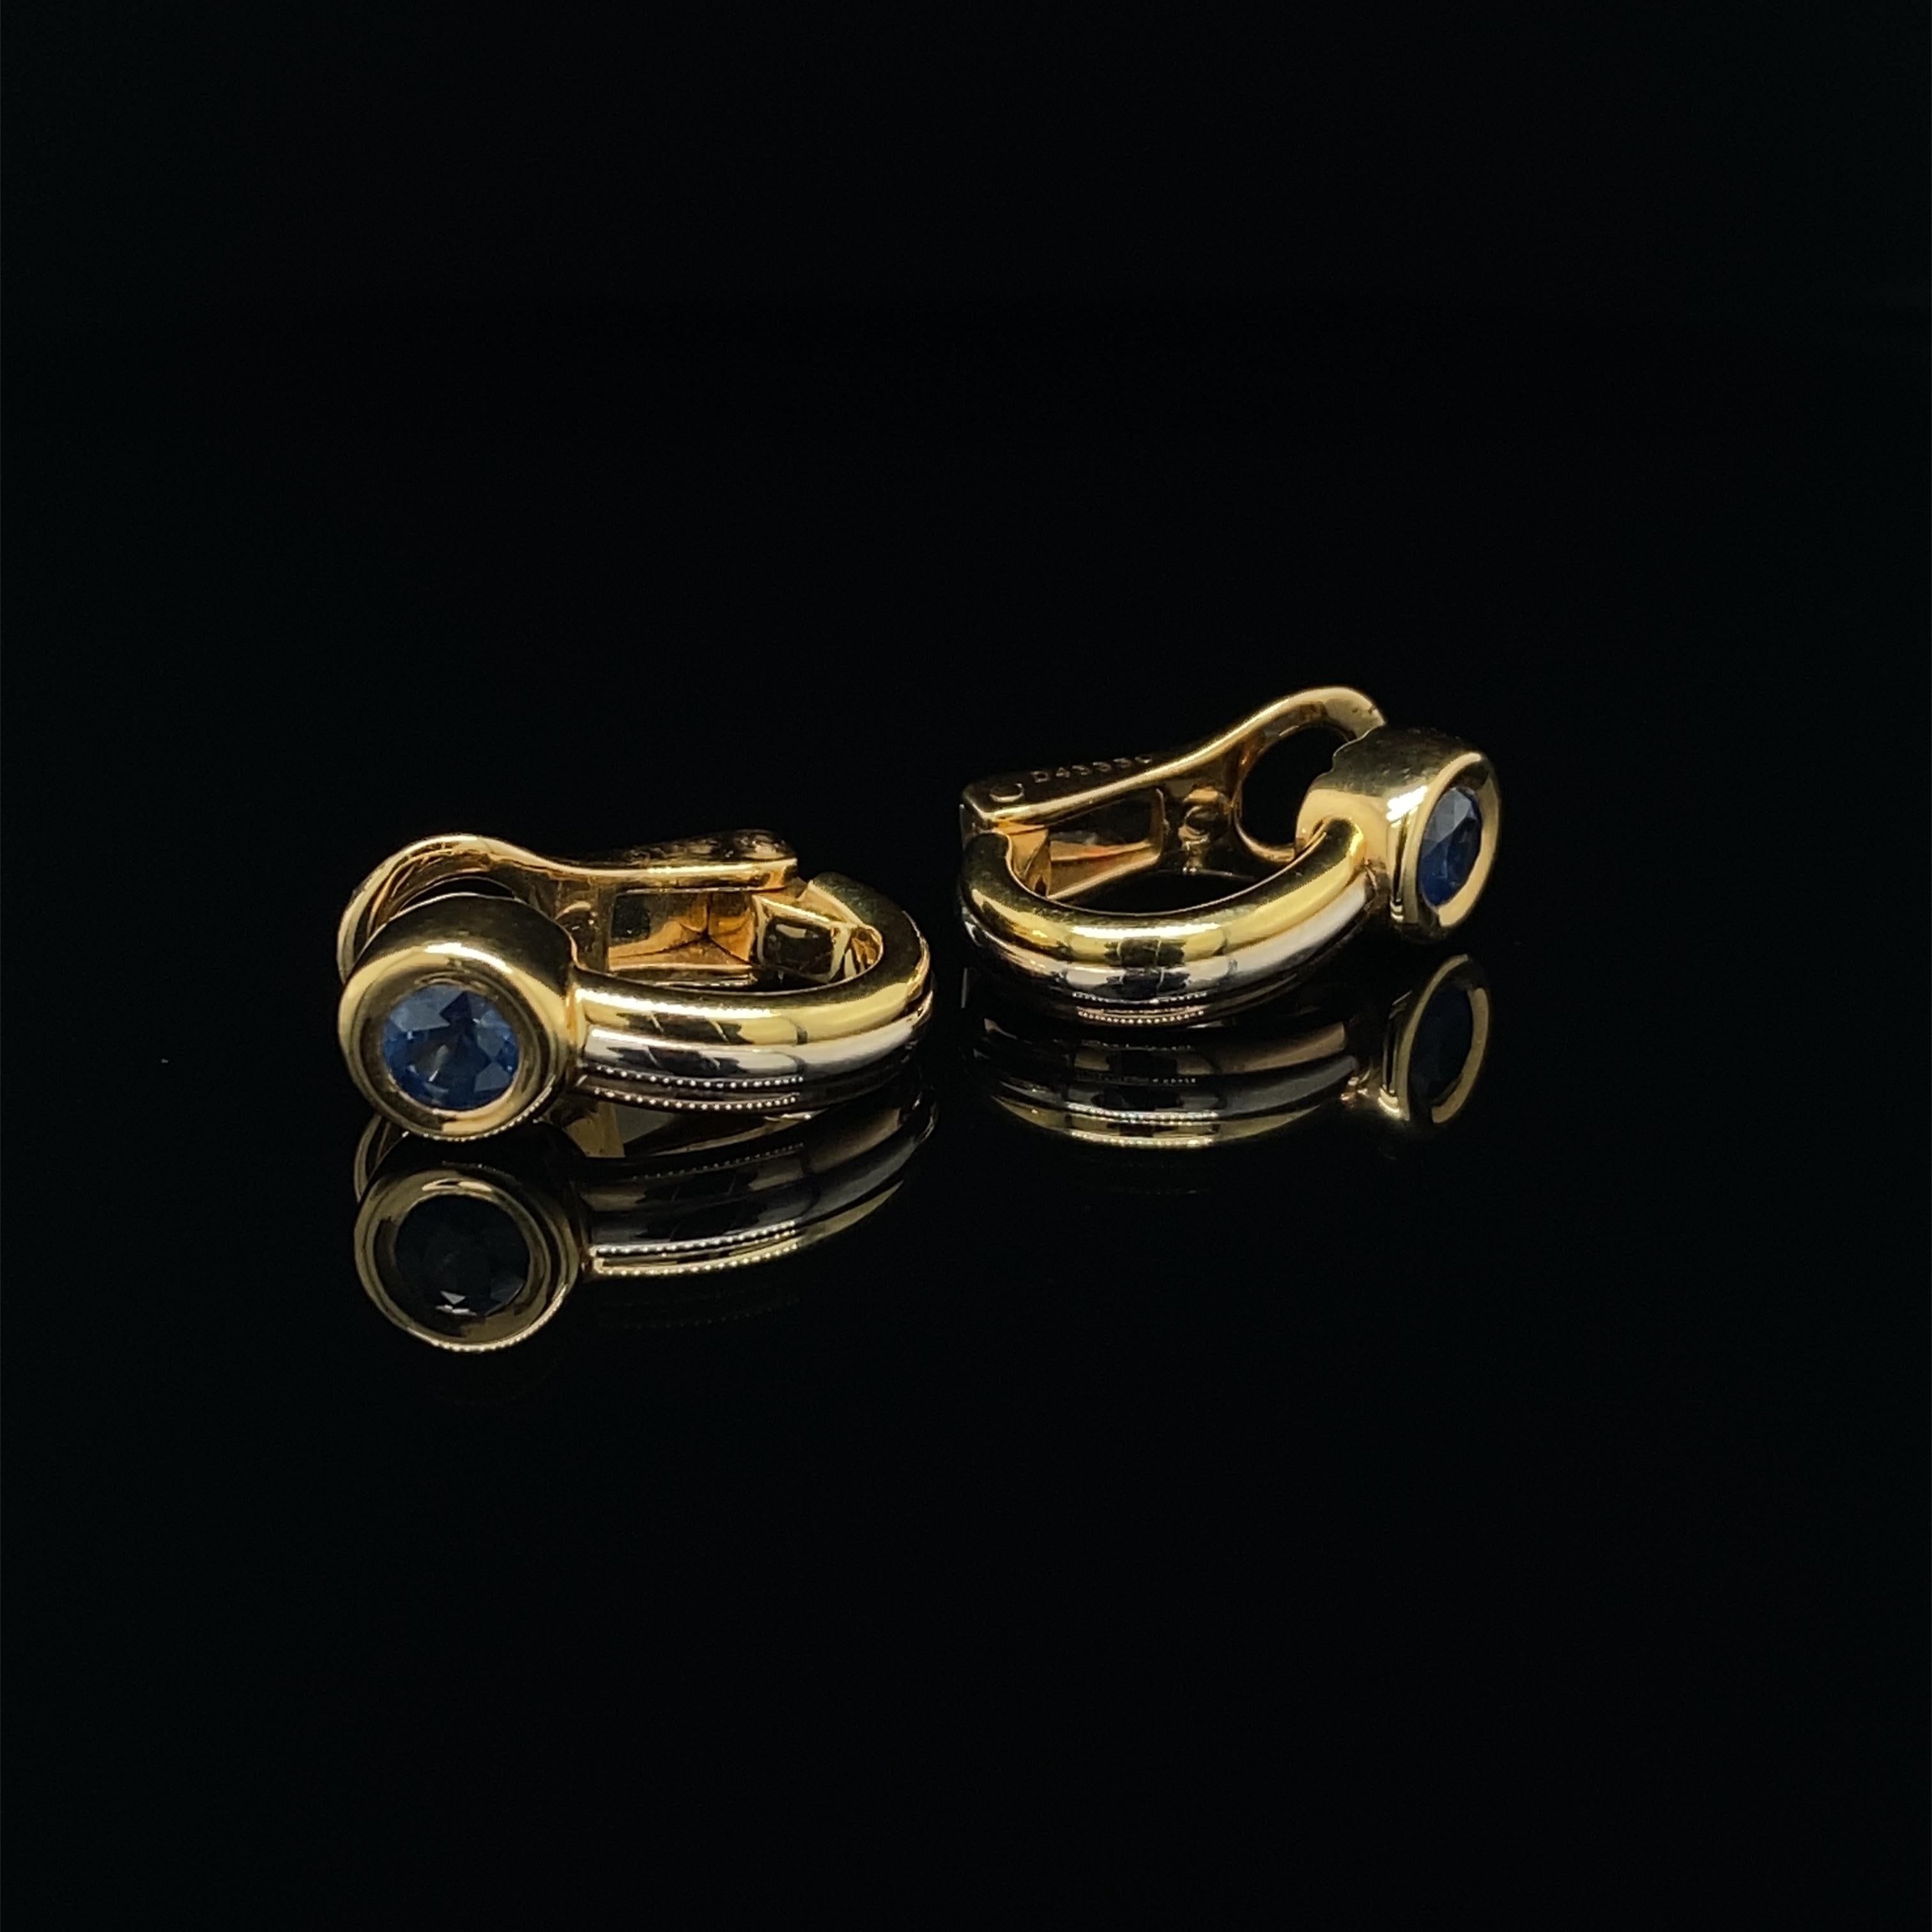 A pair of Cartier Forgorra vintage trinity sapphire 18 karat tri-gold earrings.

A beautiful pair of vintage Cartier earrings from the mid 1990's 'Forgorra' collection, crafted in three tone 18 karat yellow, white and rose gold, the rounded clips